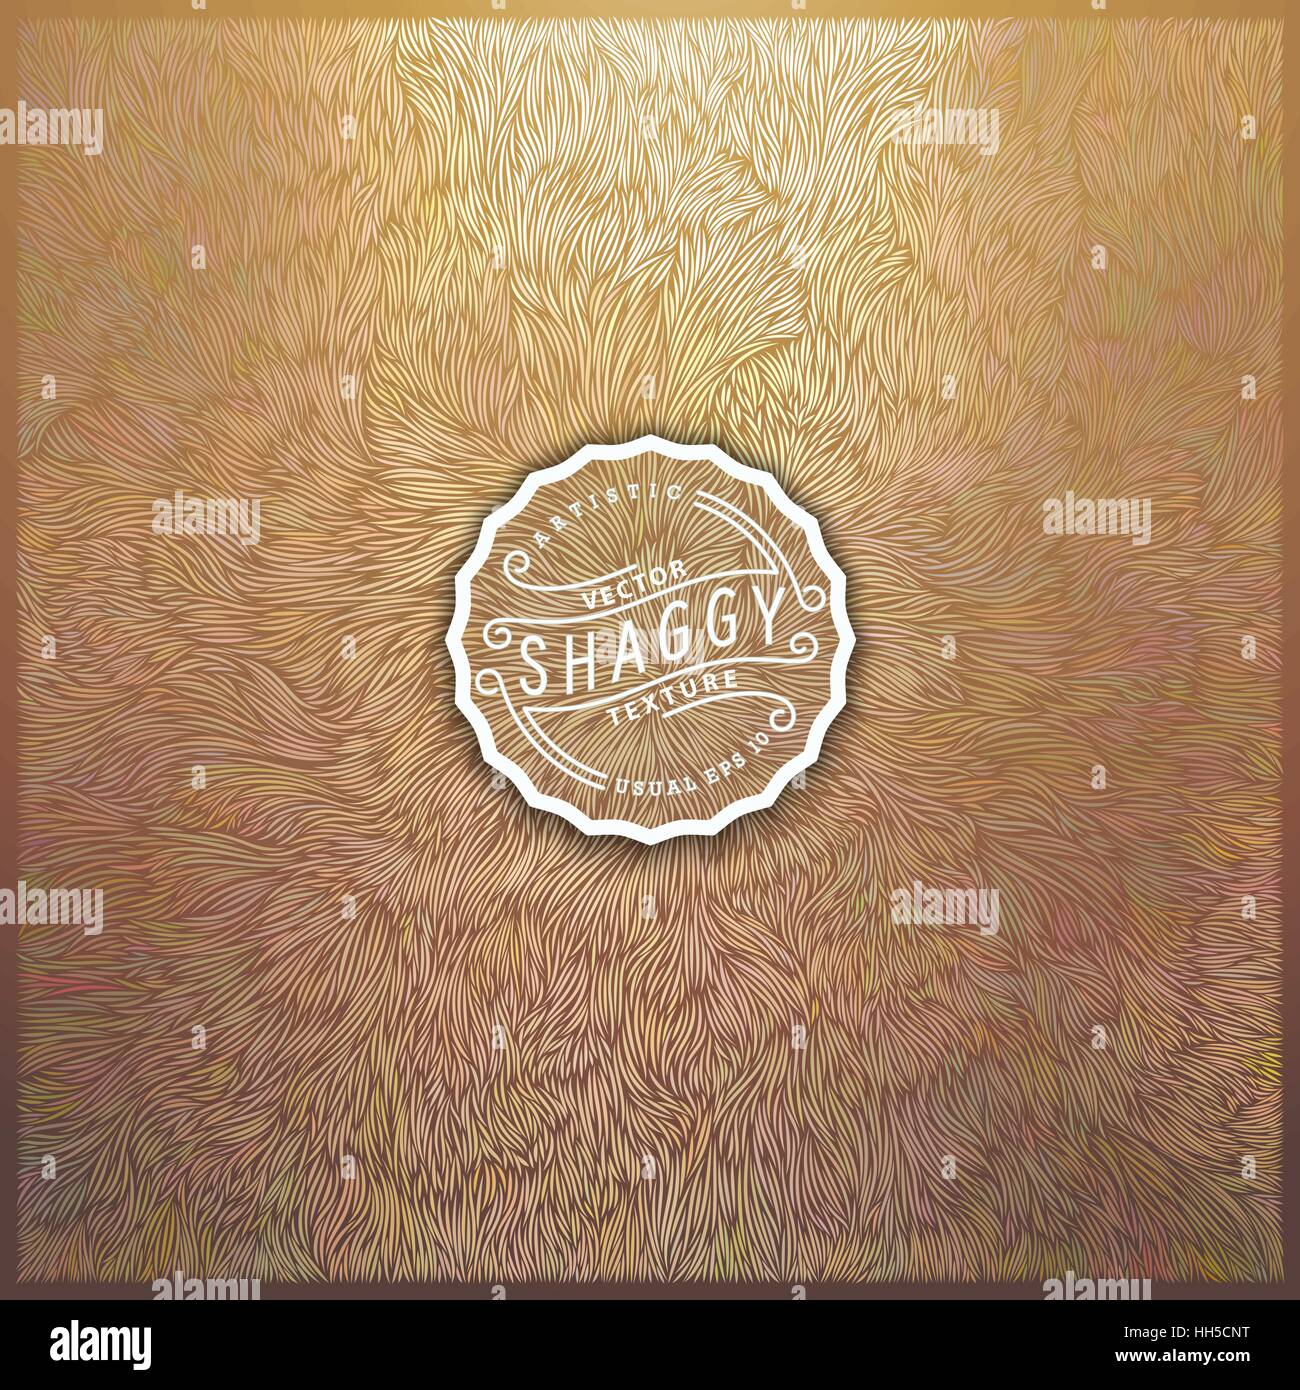 Art background with texture of chaotic wavy smears. Stock Vector